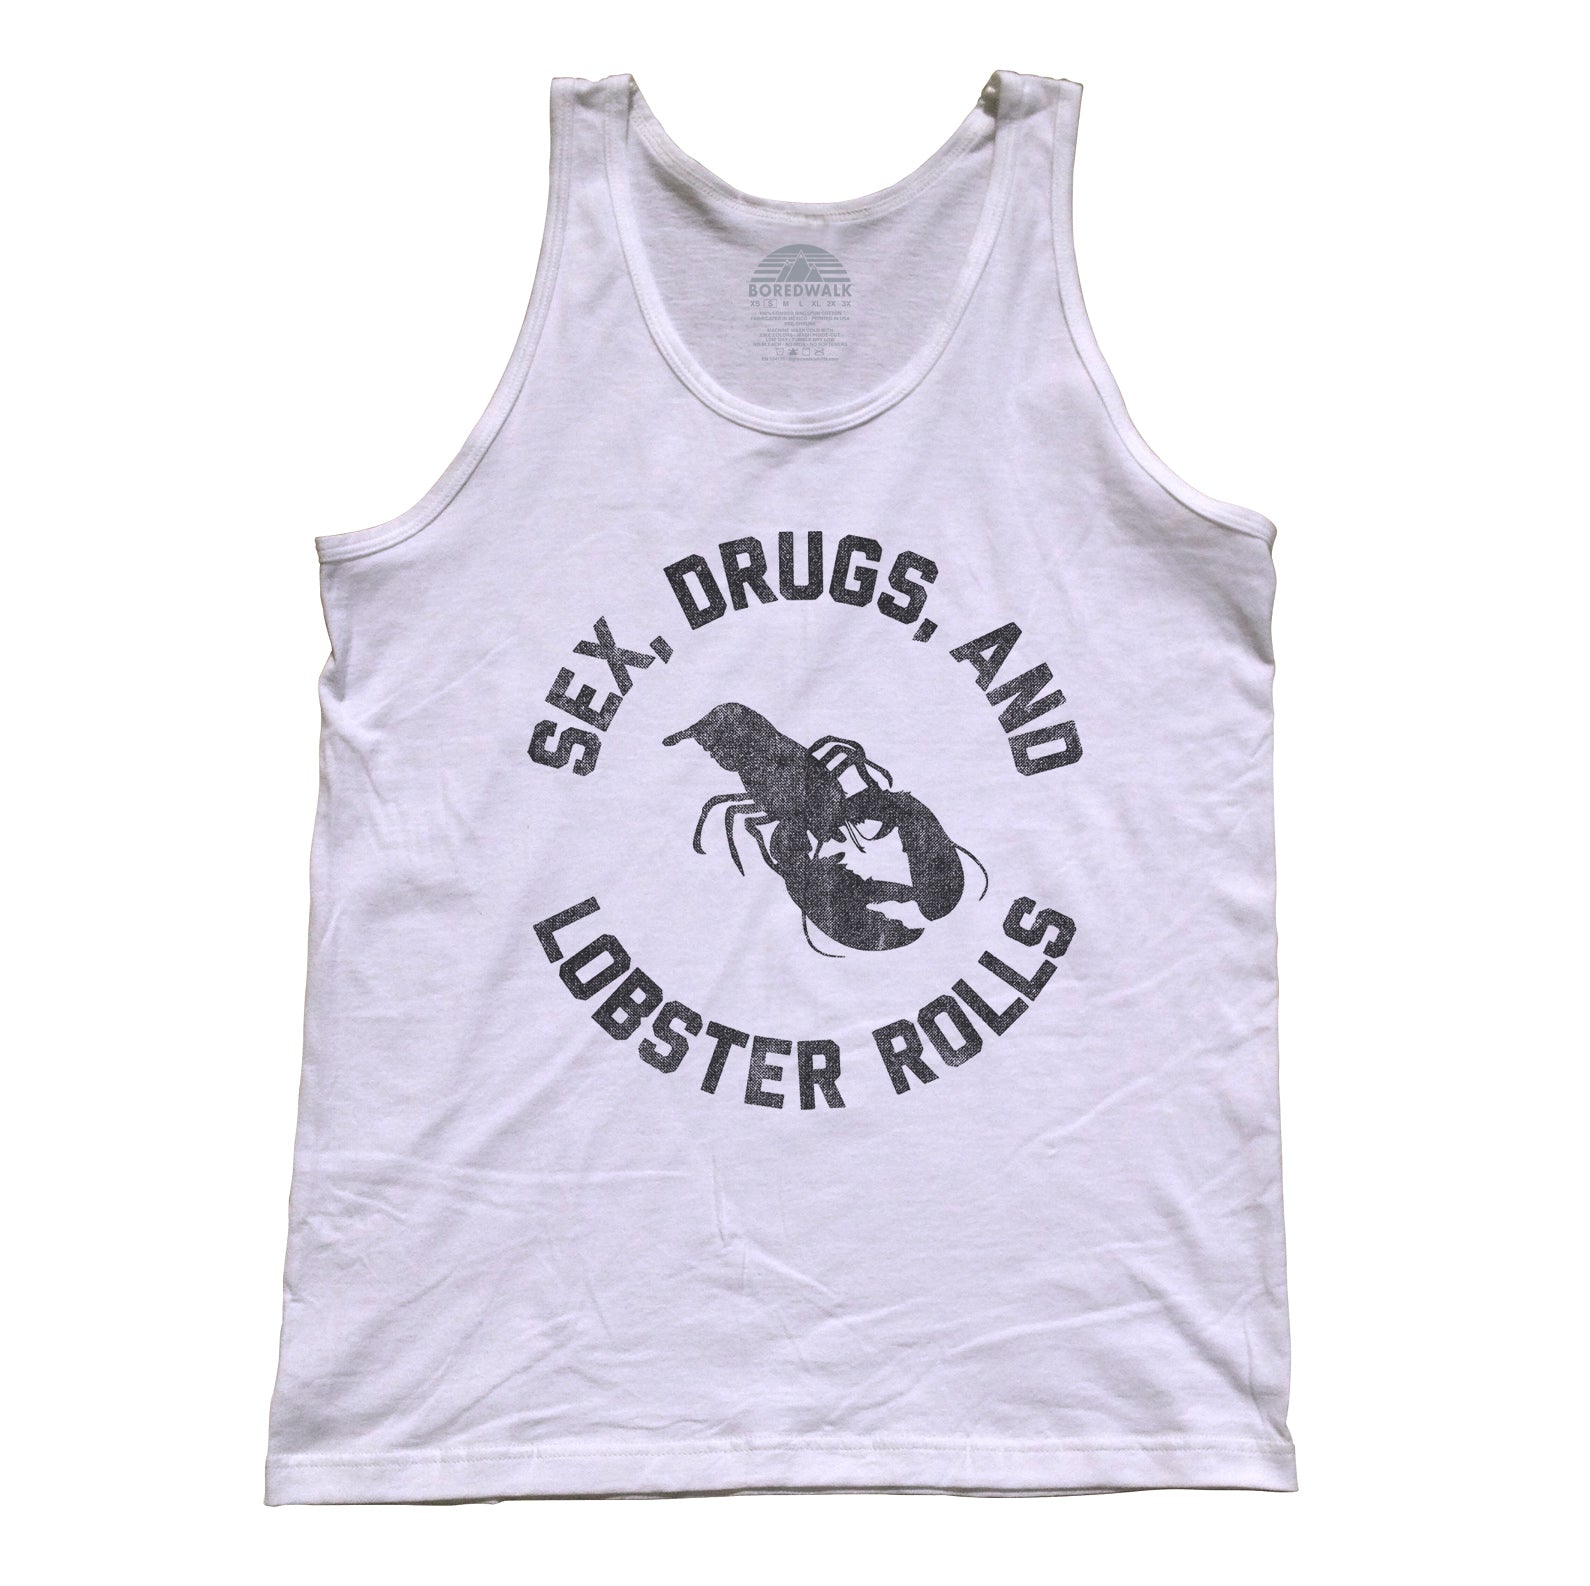 Unisex Sex Drugs and Lobster Rolls Tank Top